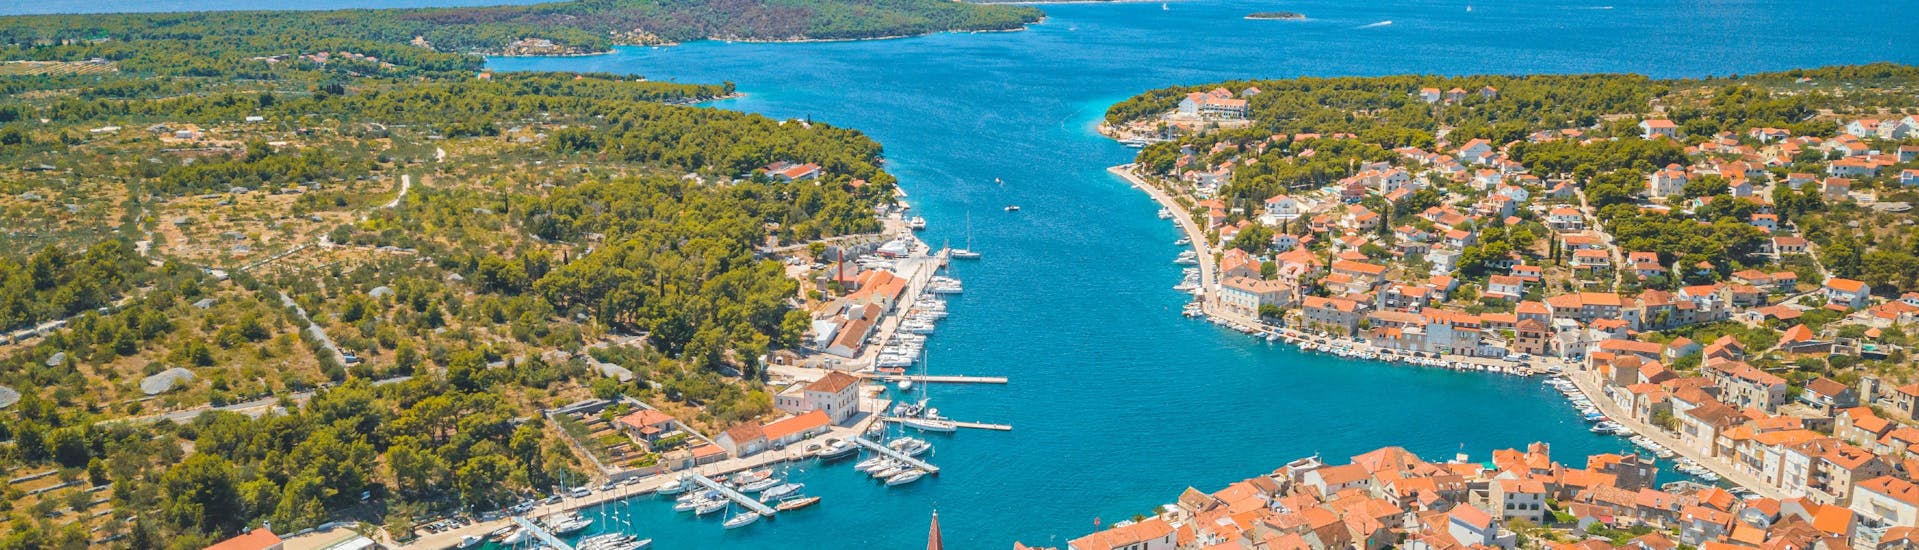 Picture of the port of Hvar during the private boat trip to Hvar, Brač and the Pakleni Islands with Mayer Charter Trogir.